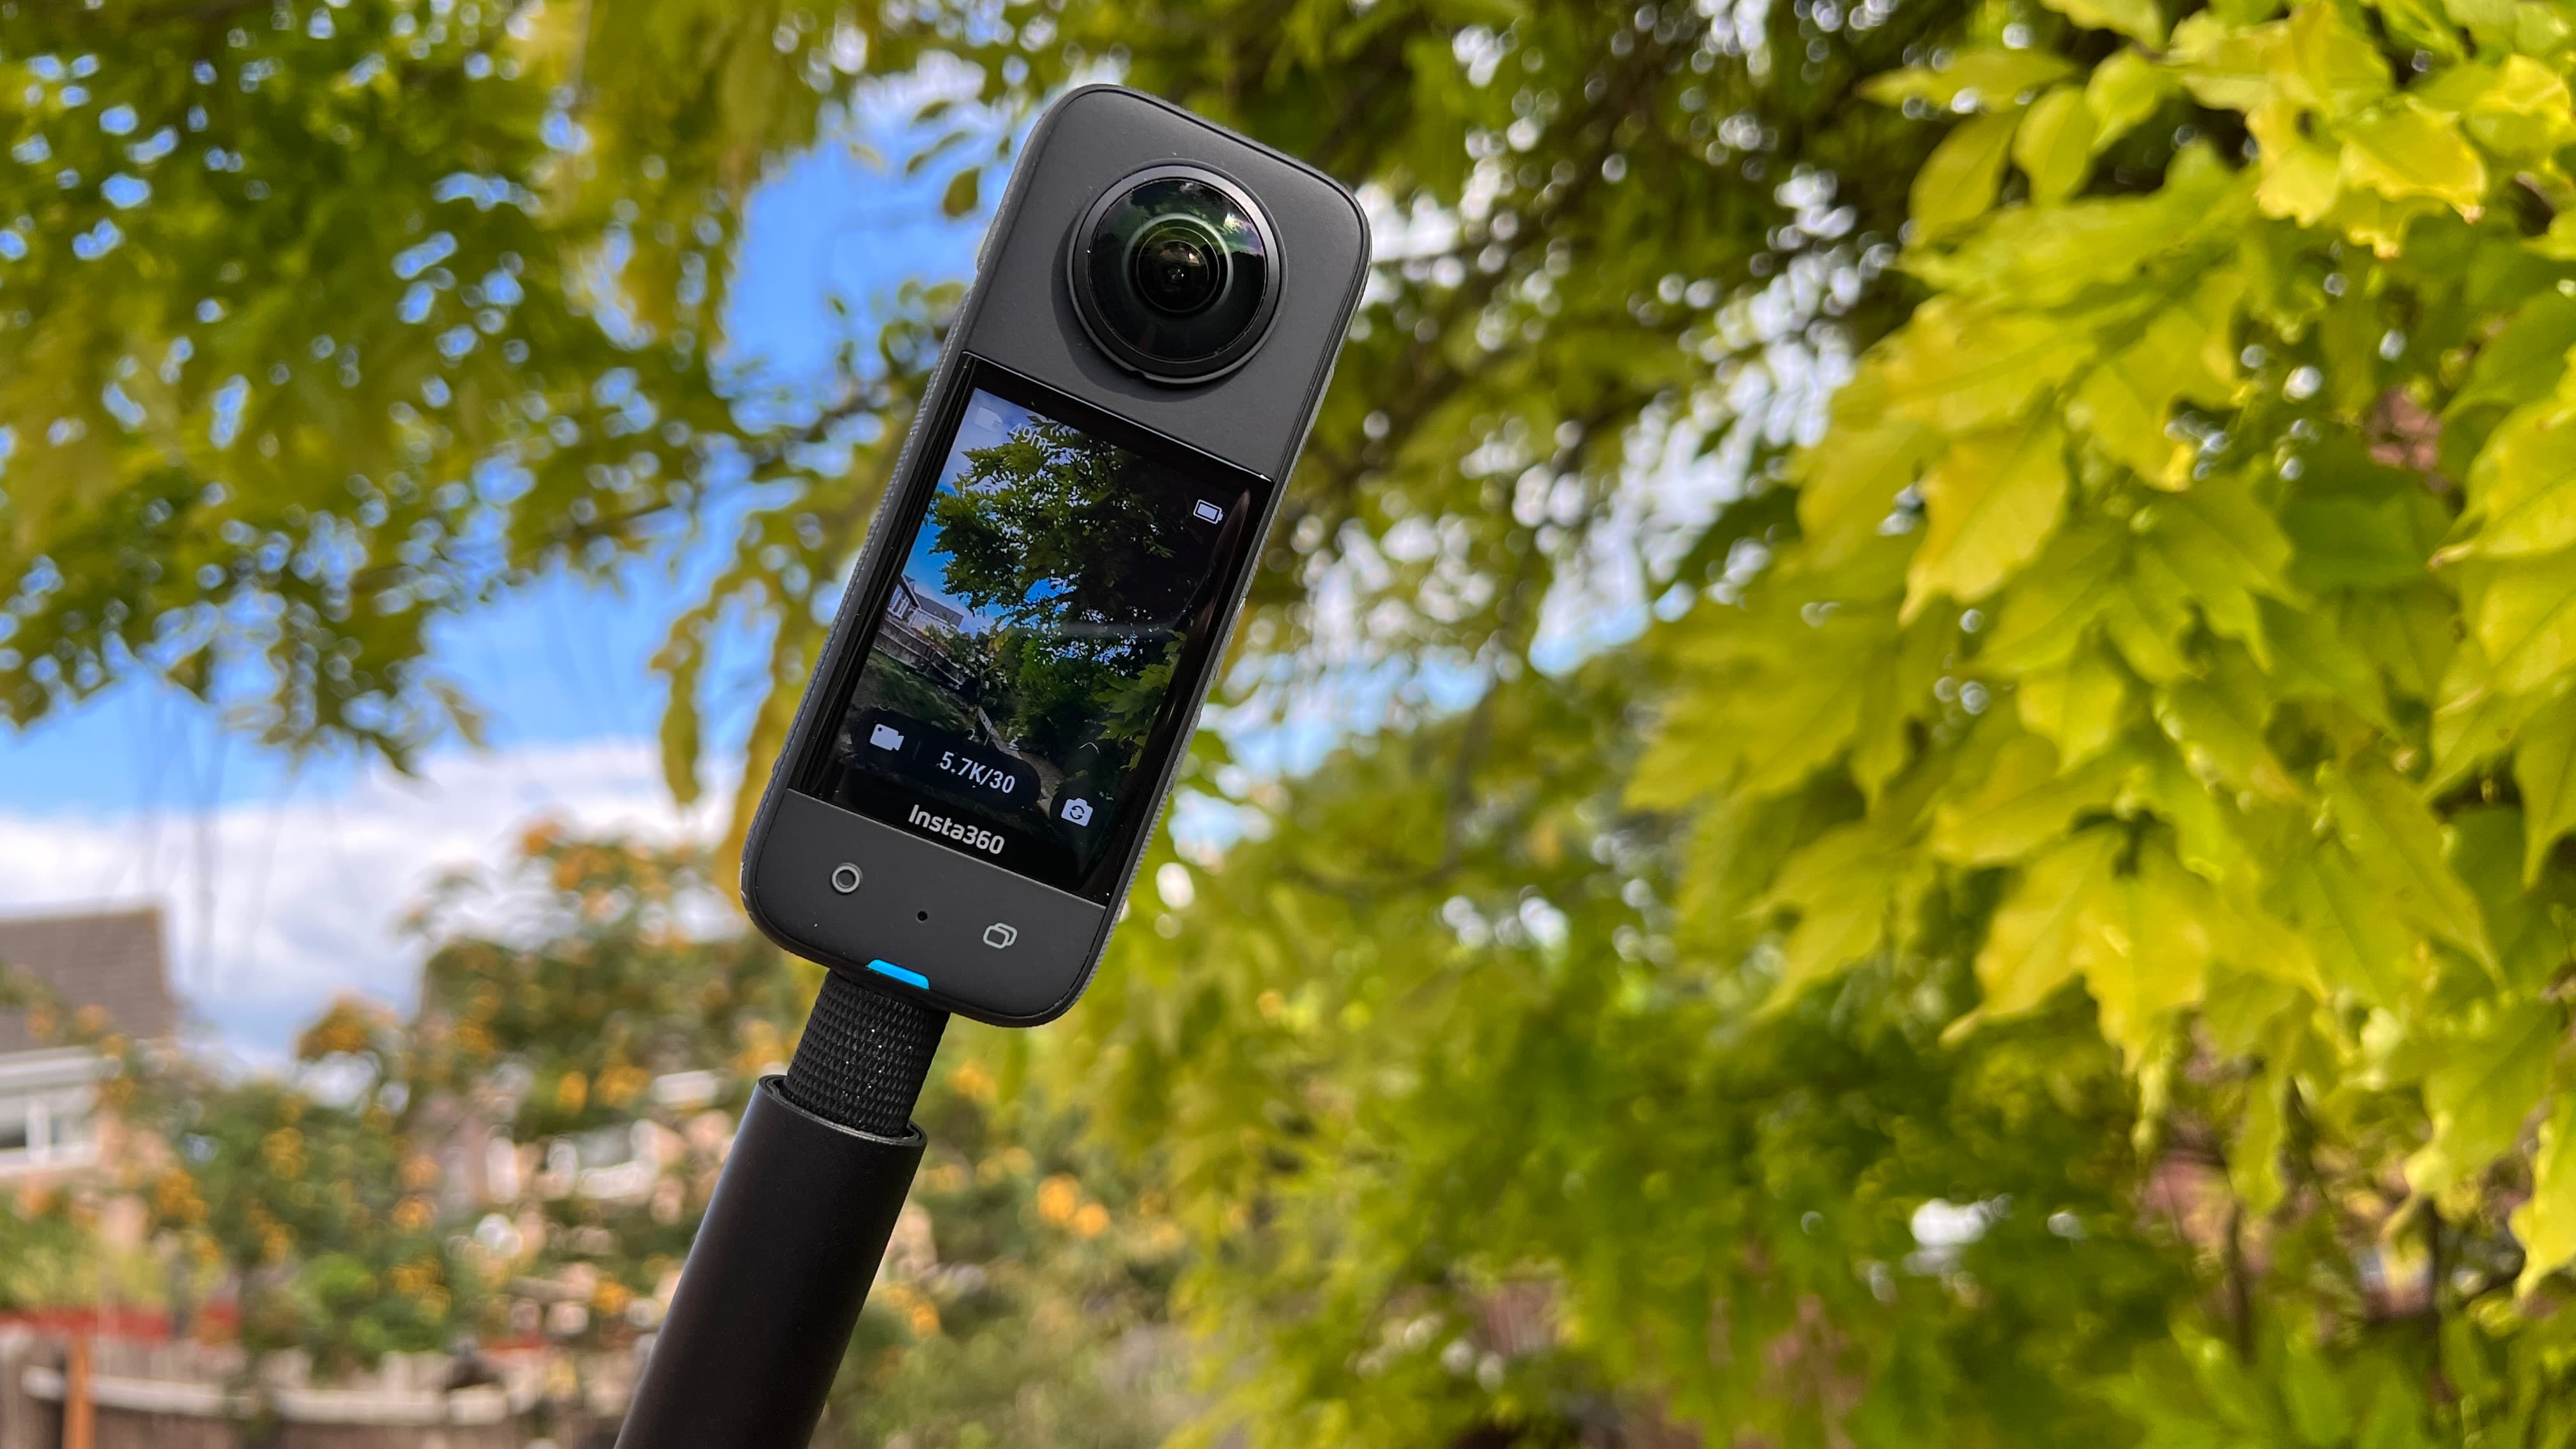 Insta360 X3: 360° Action Camera Review